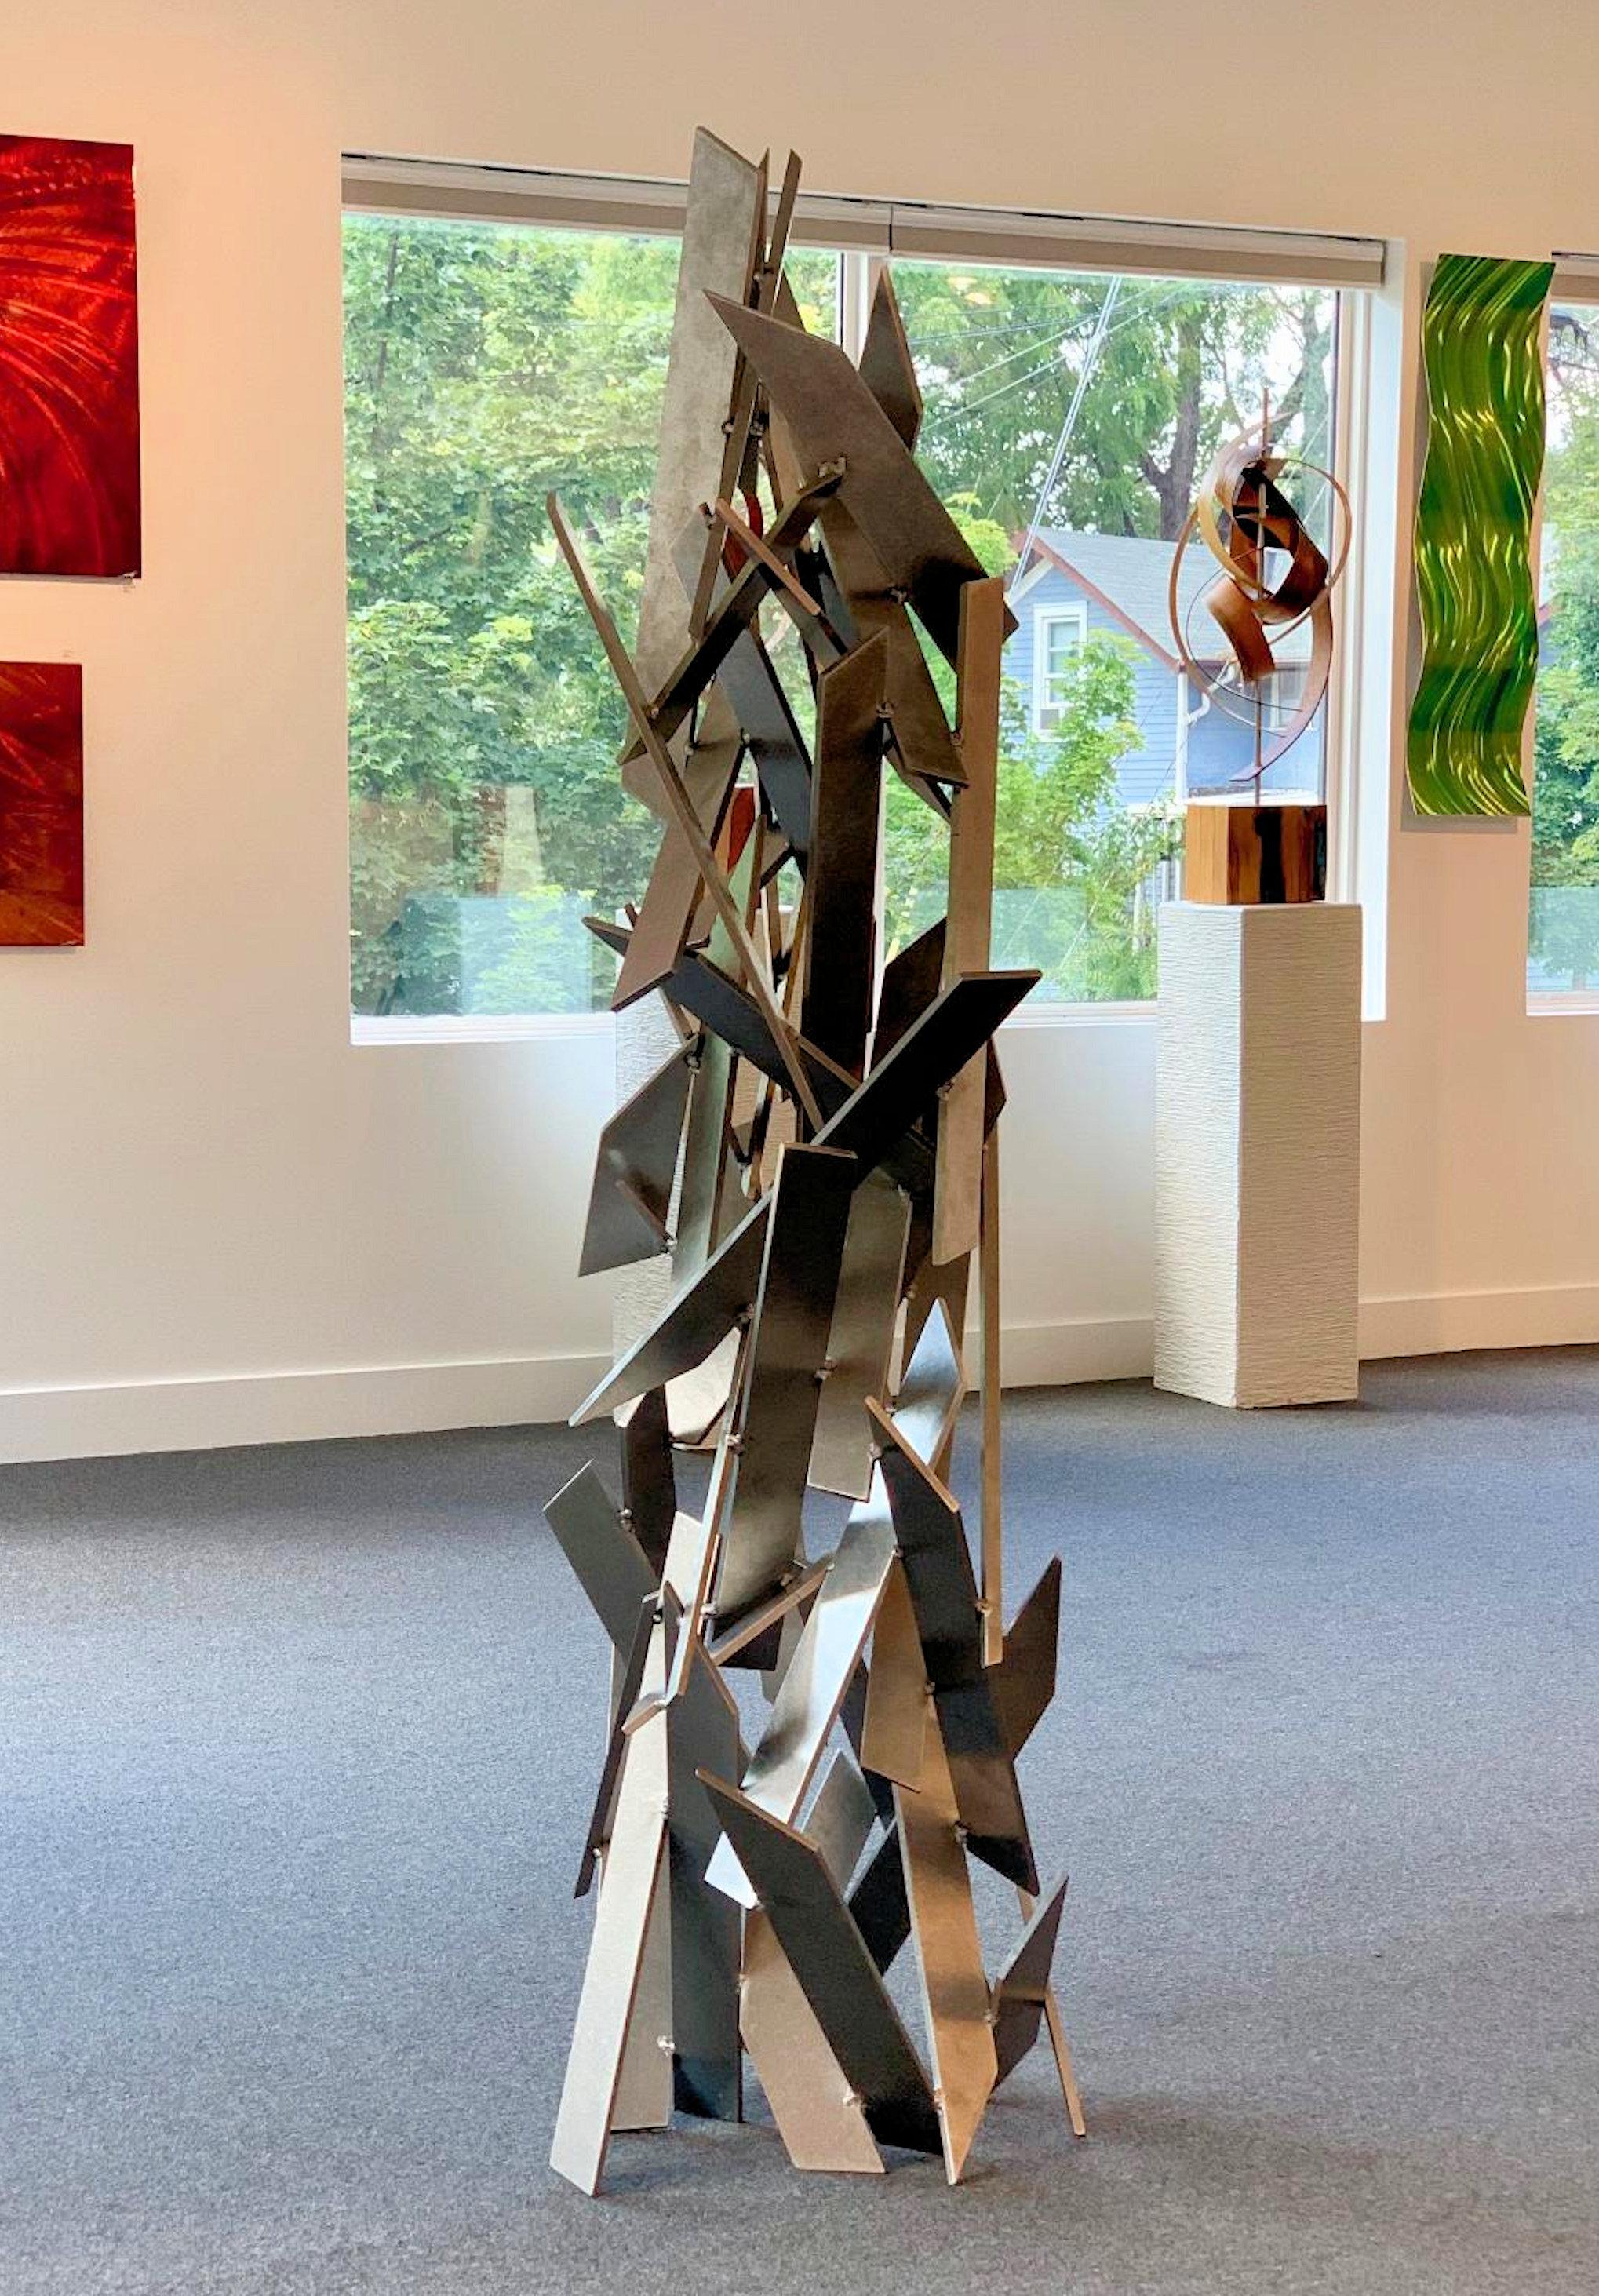 TITLE: Mania
ARTIST: Sebastian R.

DIMENSIONS
H 72 in. x W 27 in. x D 24 in.

DESCRIPTION:
Mania is an original hand-crafted and hand-welded metal sculpture made from abrasively tumbled pieces of thick aerospace grade aluminum. This sculpture